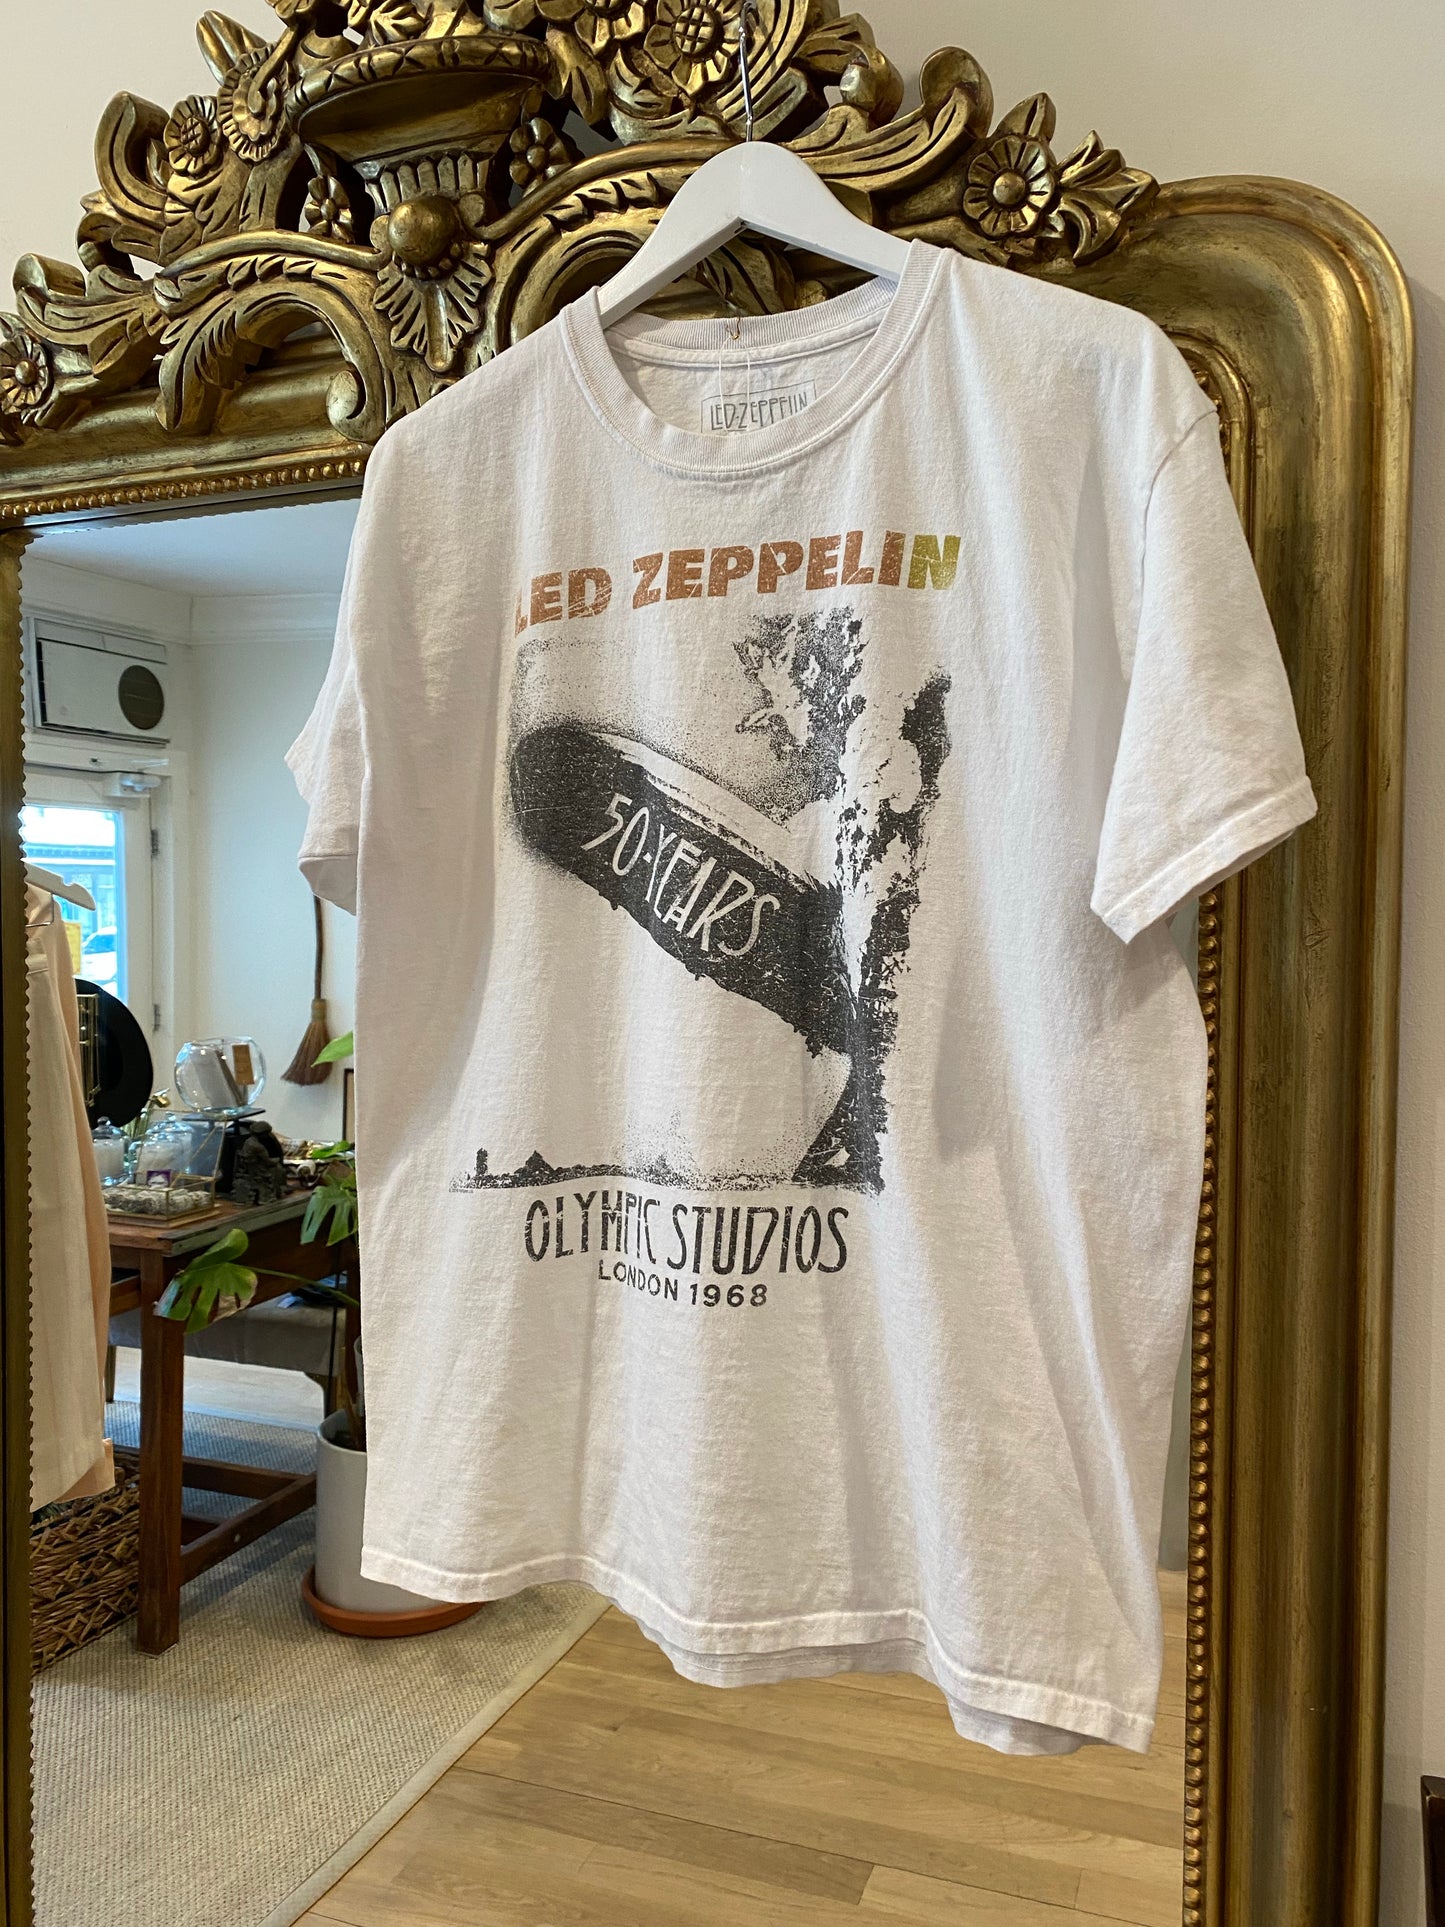 Distressed Led Zeppelin Tee